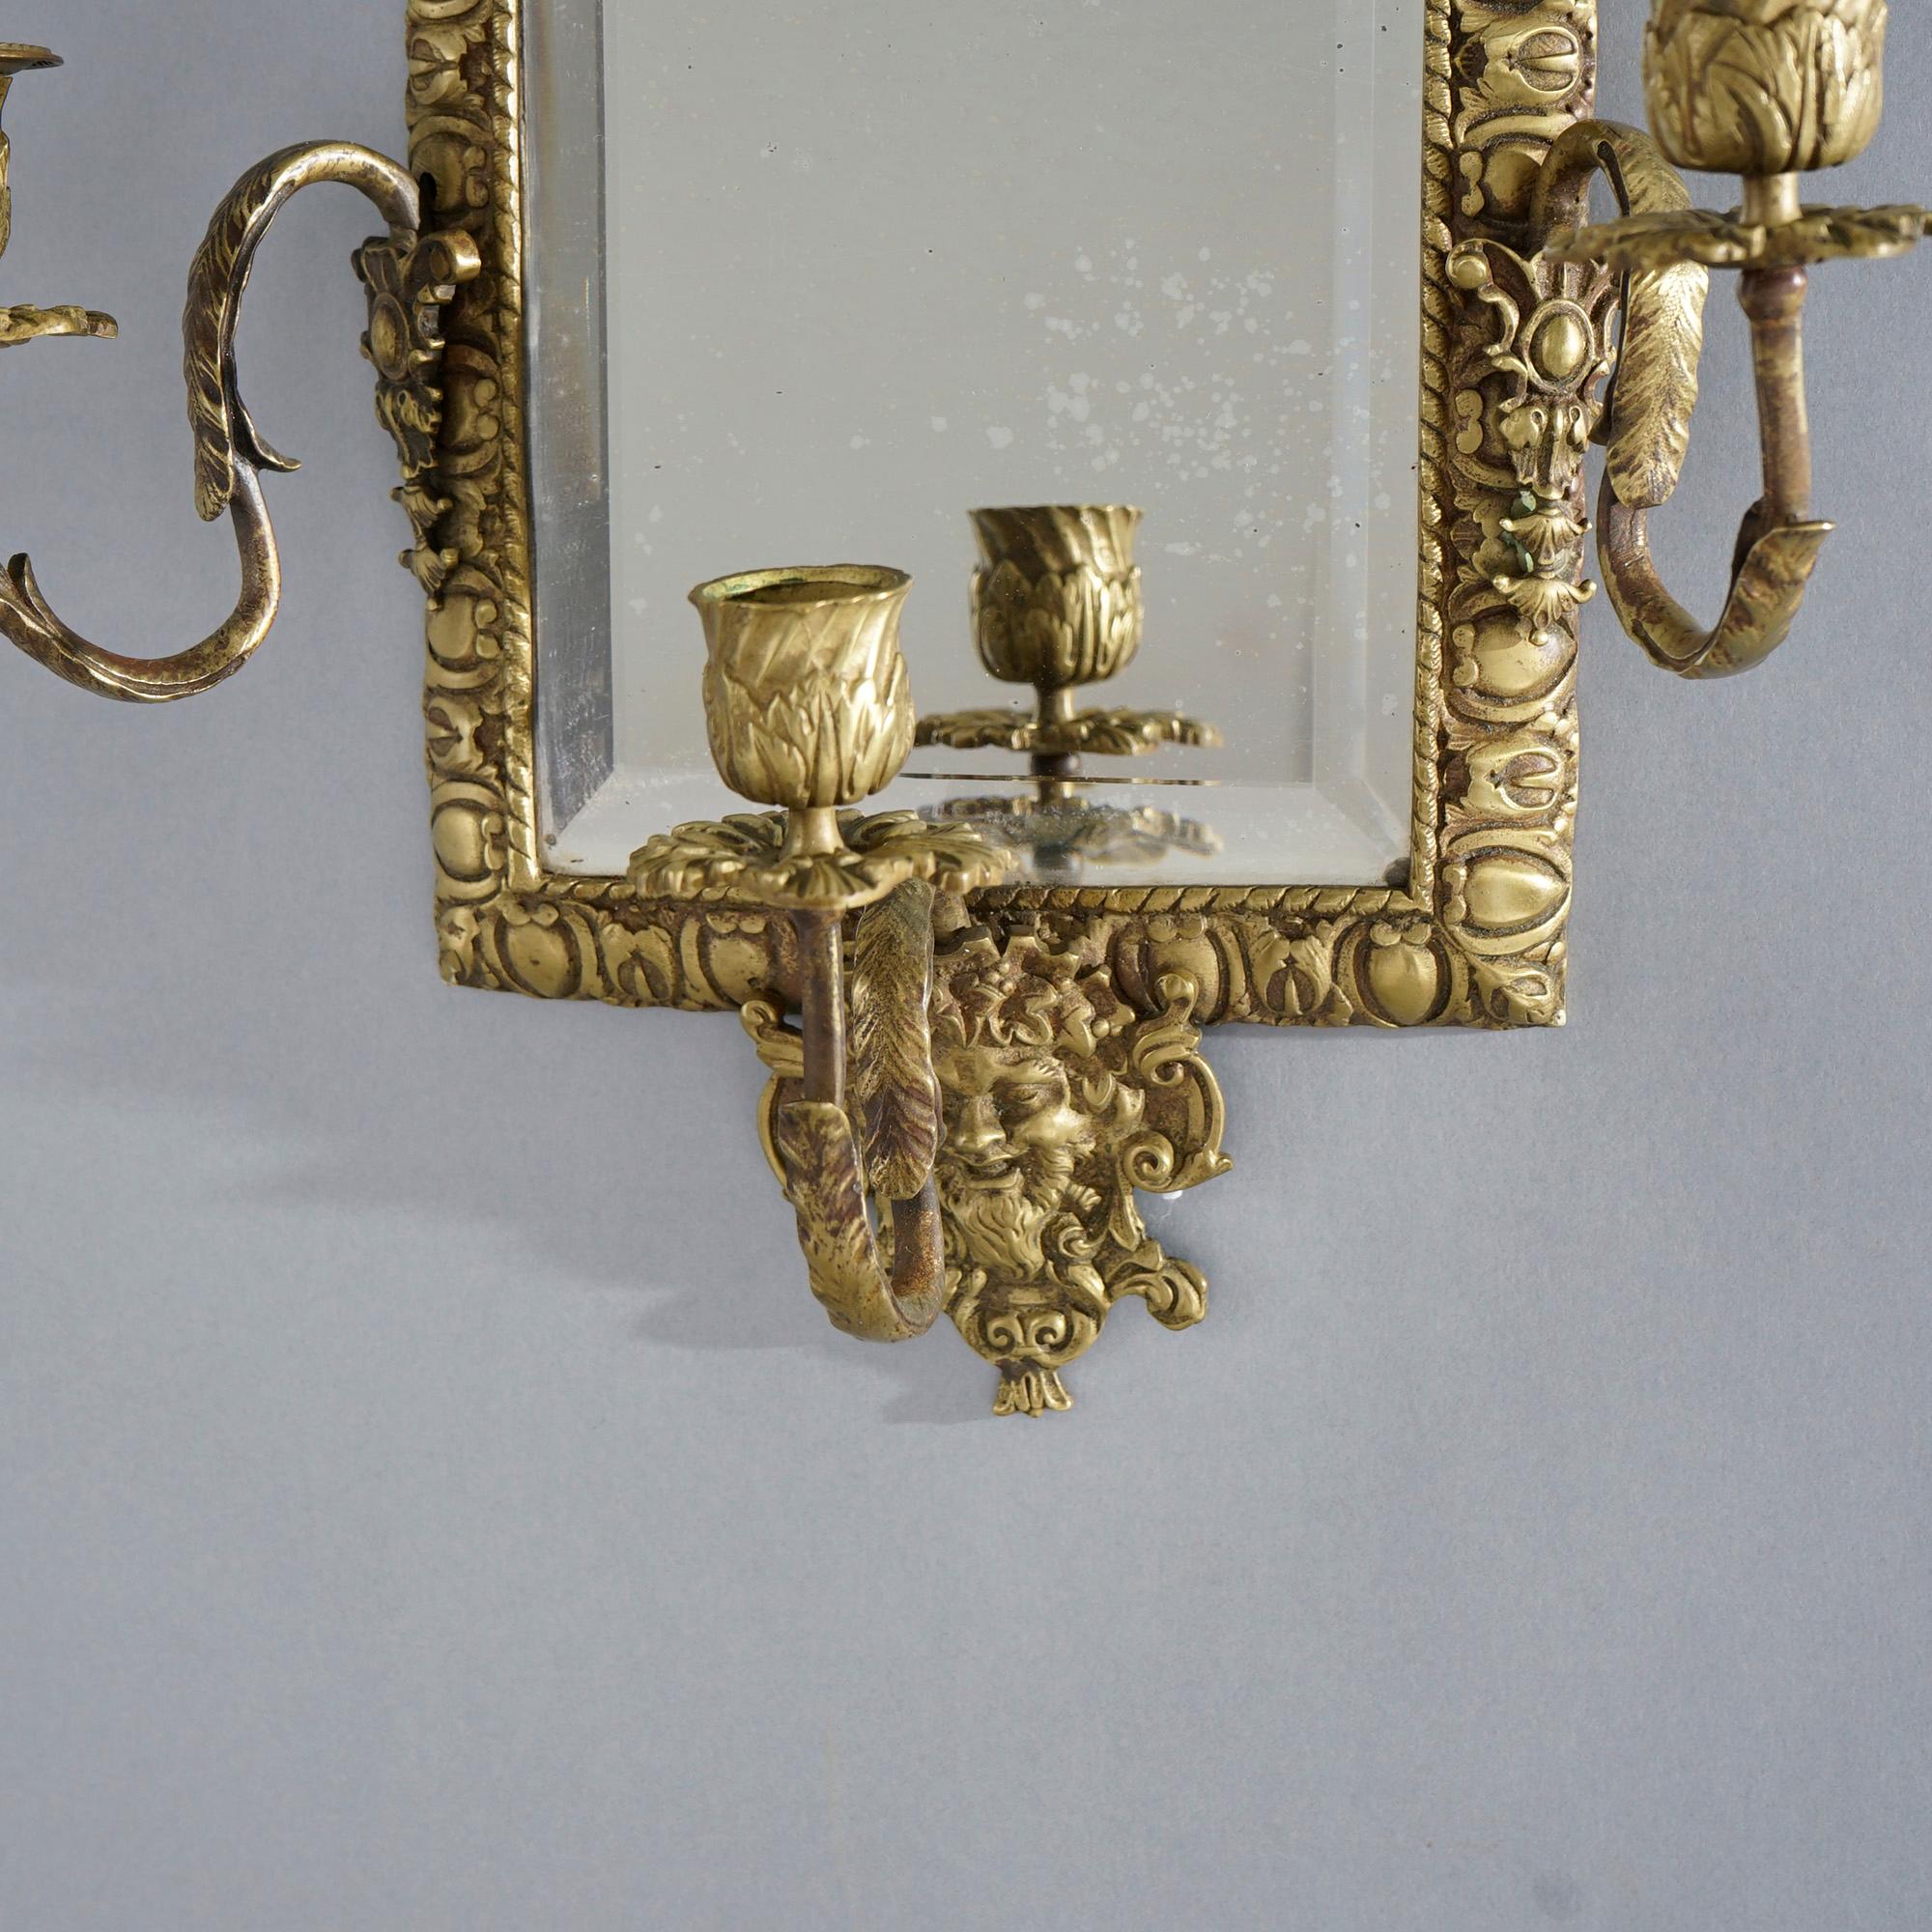 Pair Antique Victorian Mirrored Figural Gilt Metal Wall Sconces with Masks 19thC 3